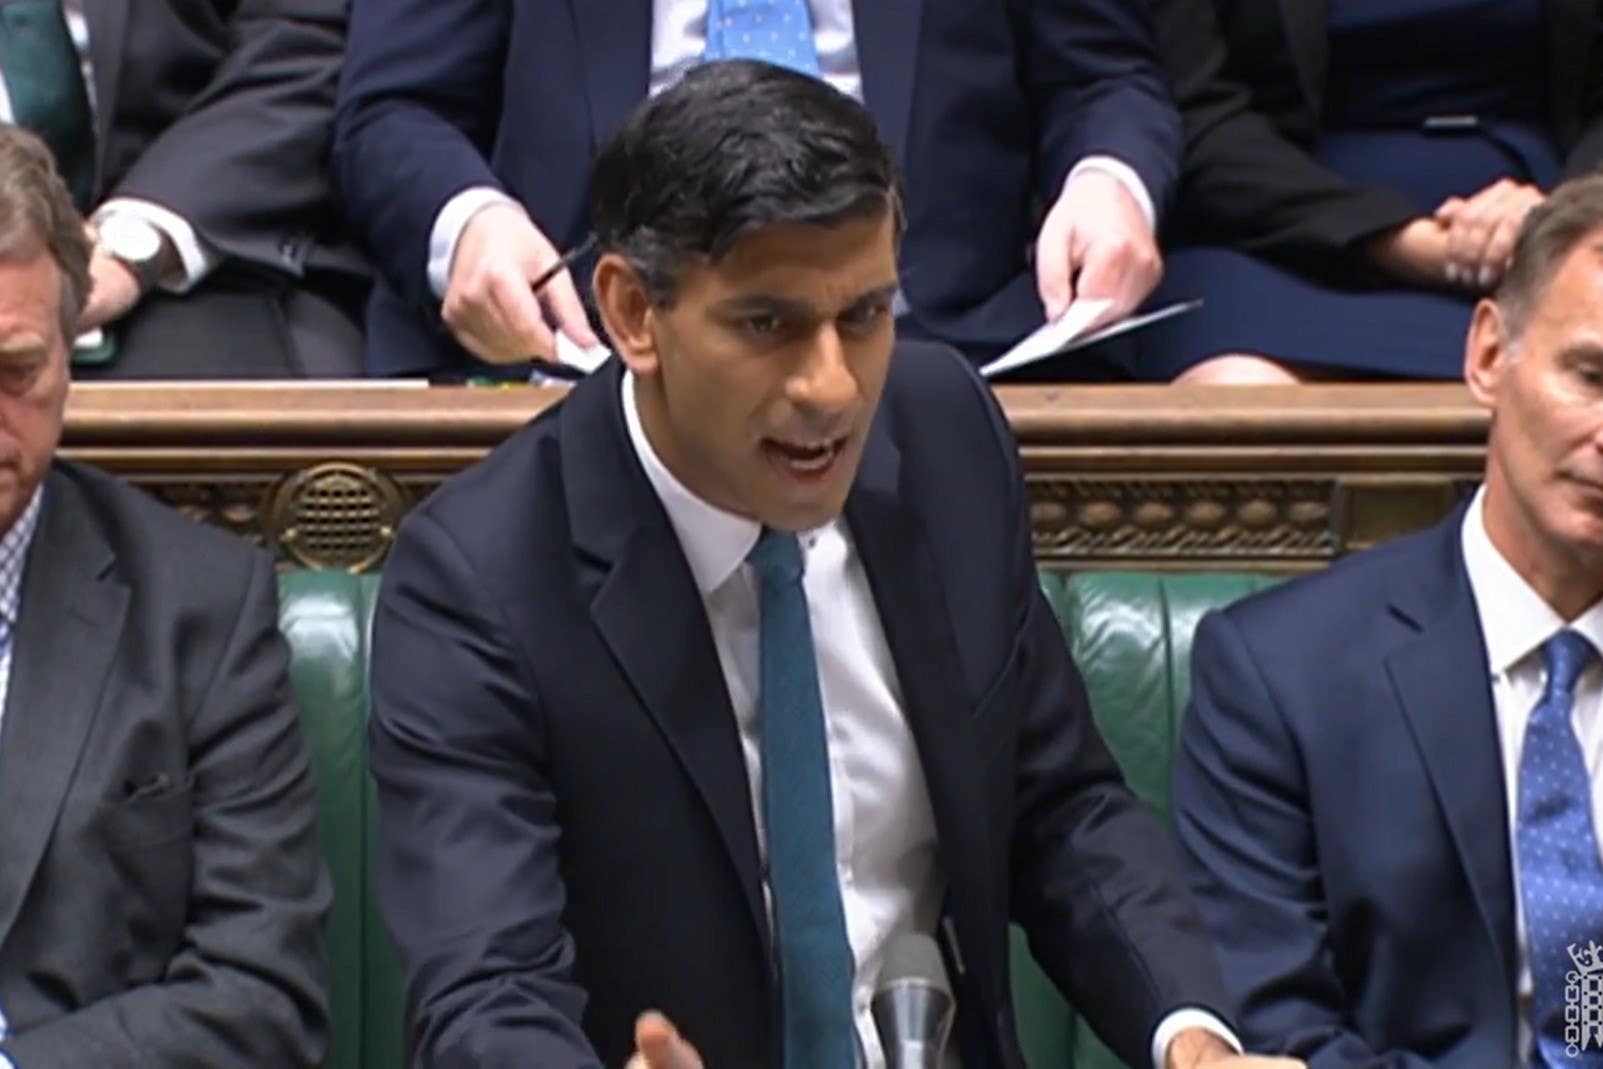 Rishi Sunak’s battery seems to be running down. He replied to Starmer’s questions with a weary condescension, complaining that the Labour leader hasn’t taken the time to understand the detail